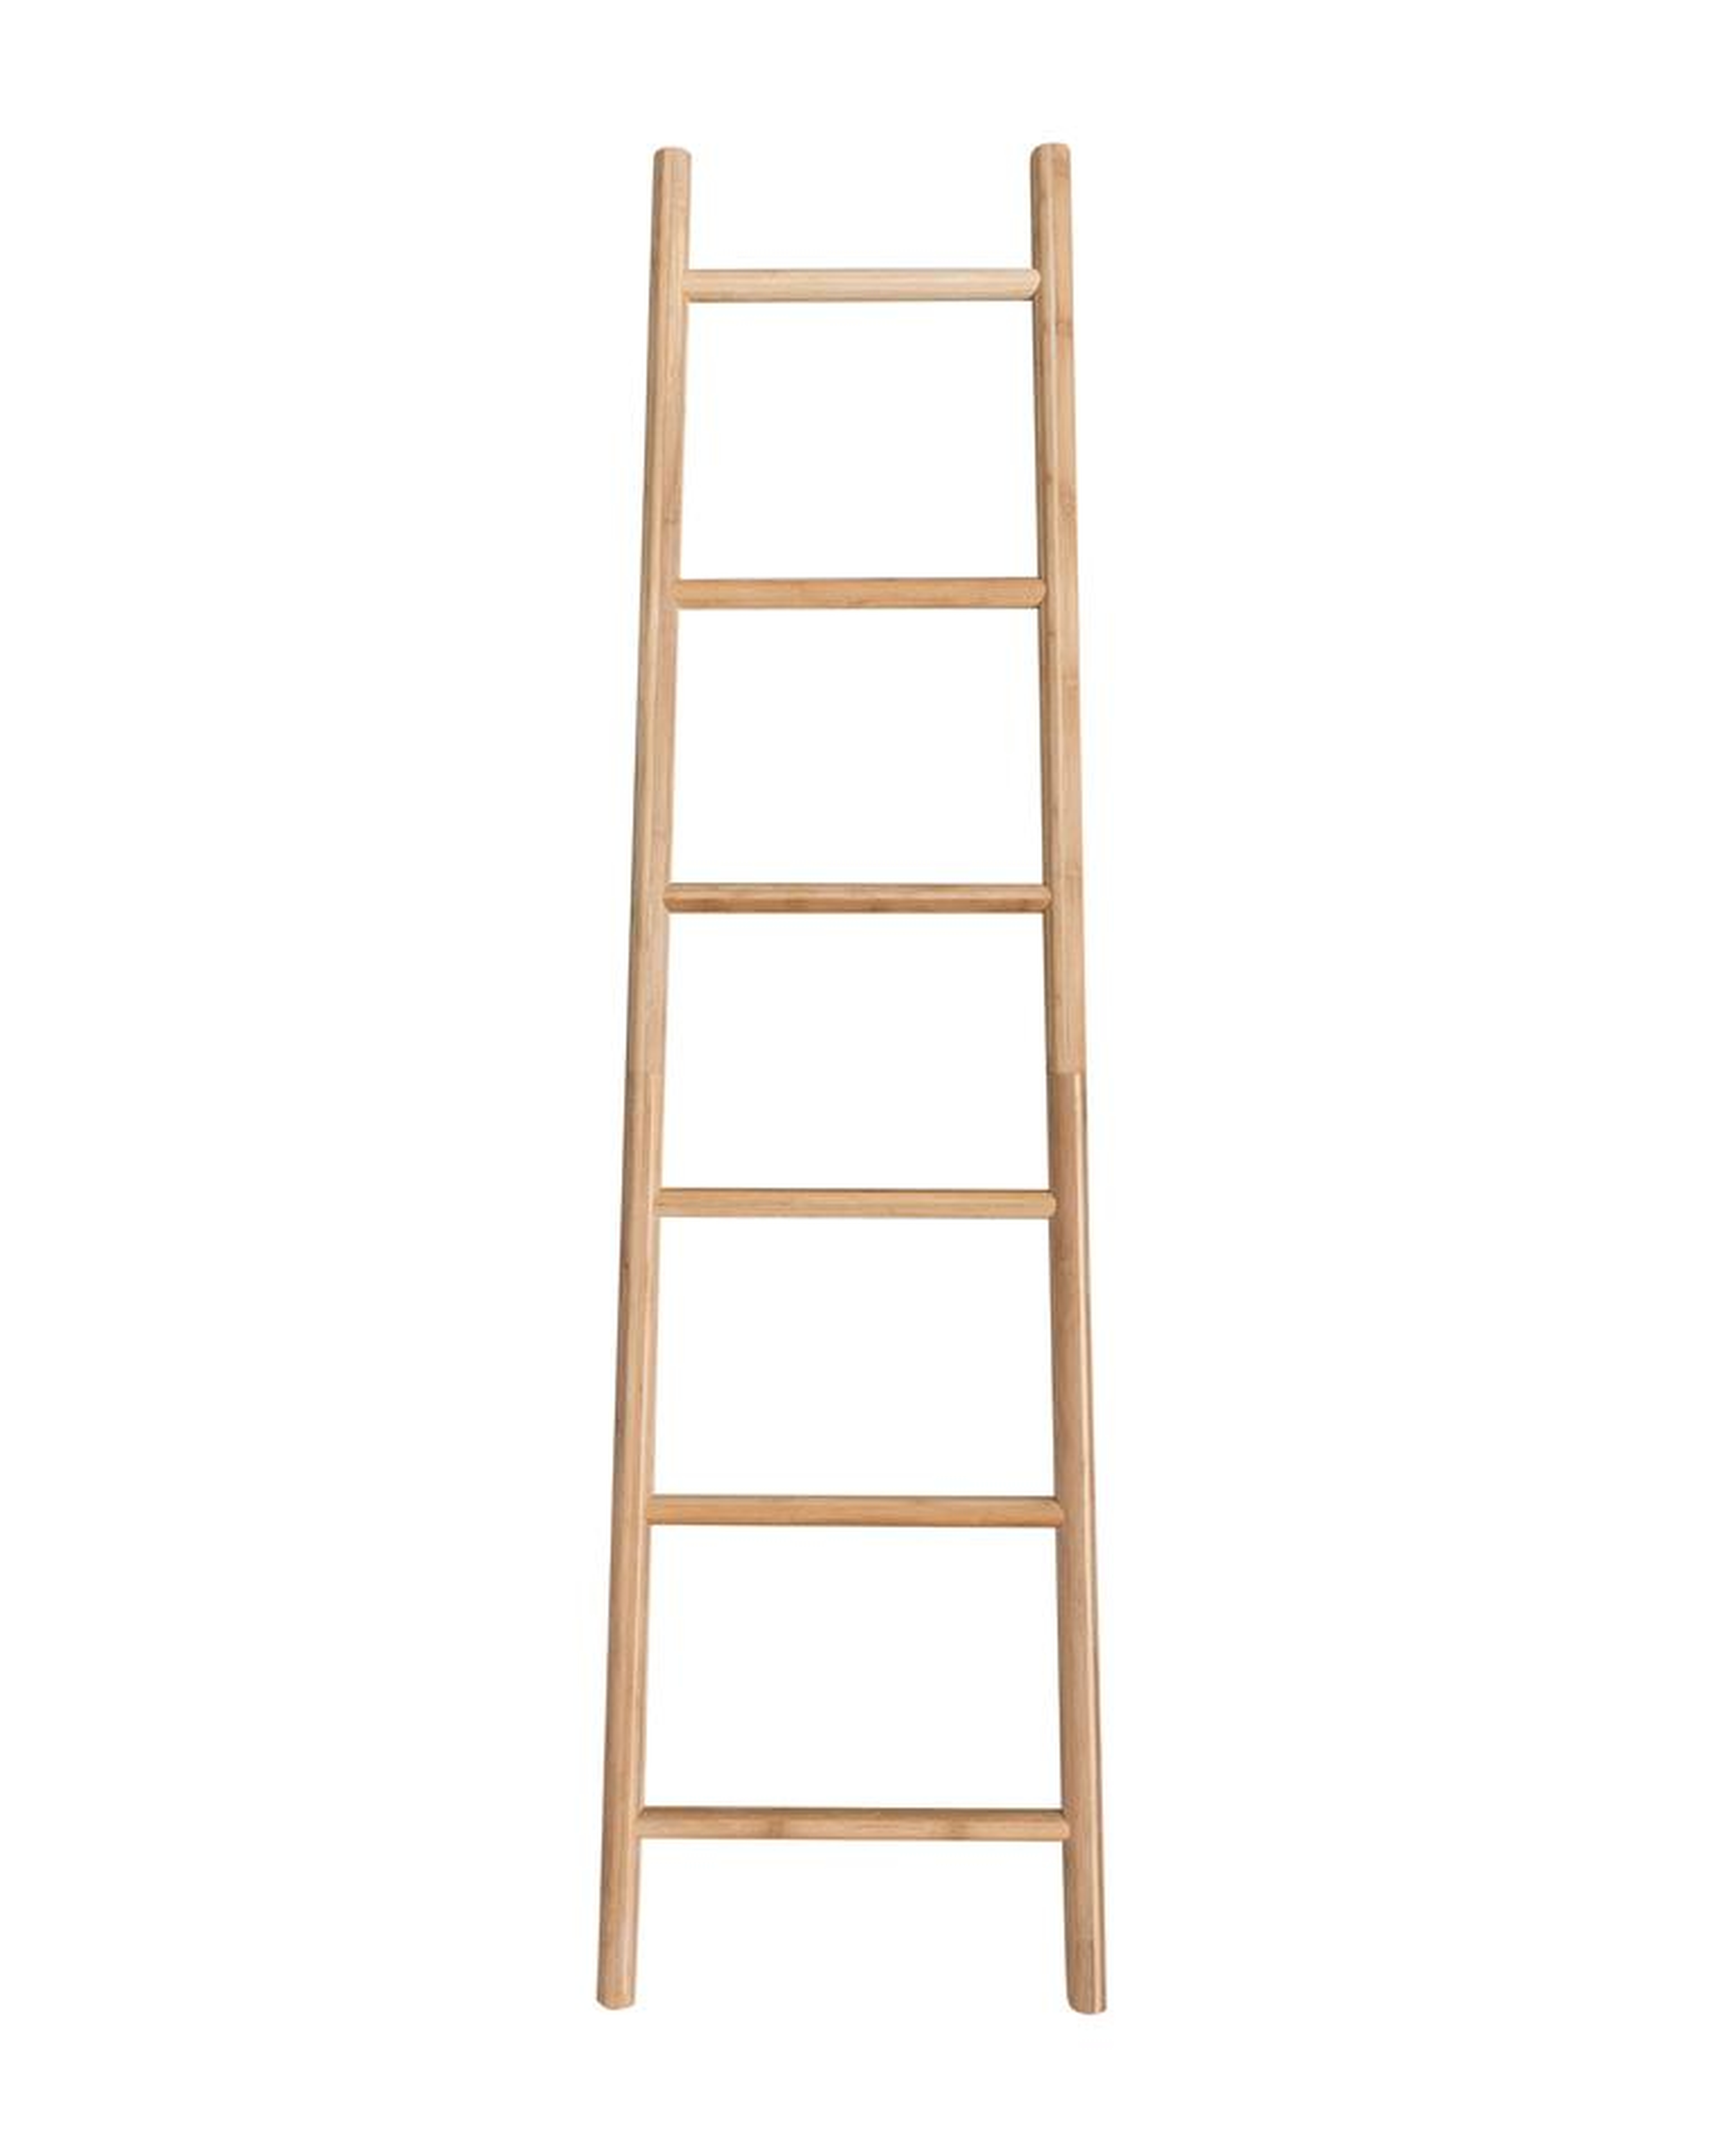 Bamboo Ladder - McGee & Co.